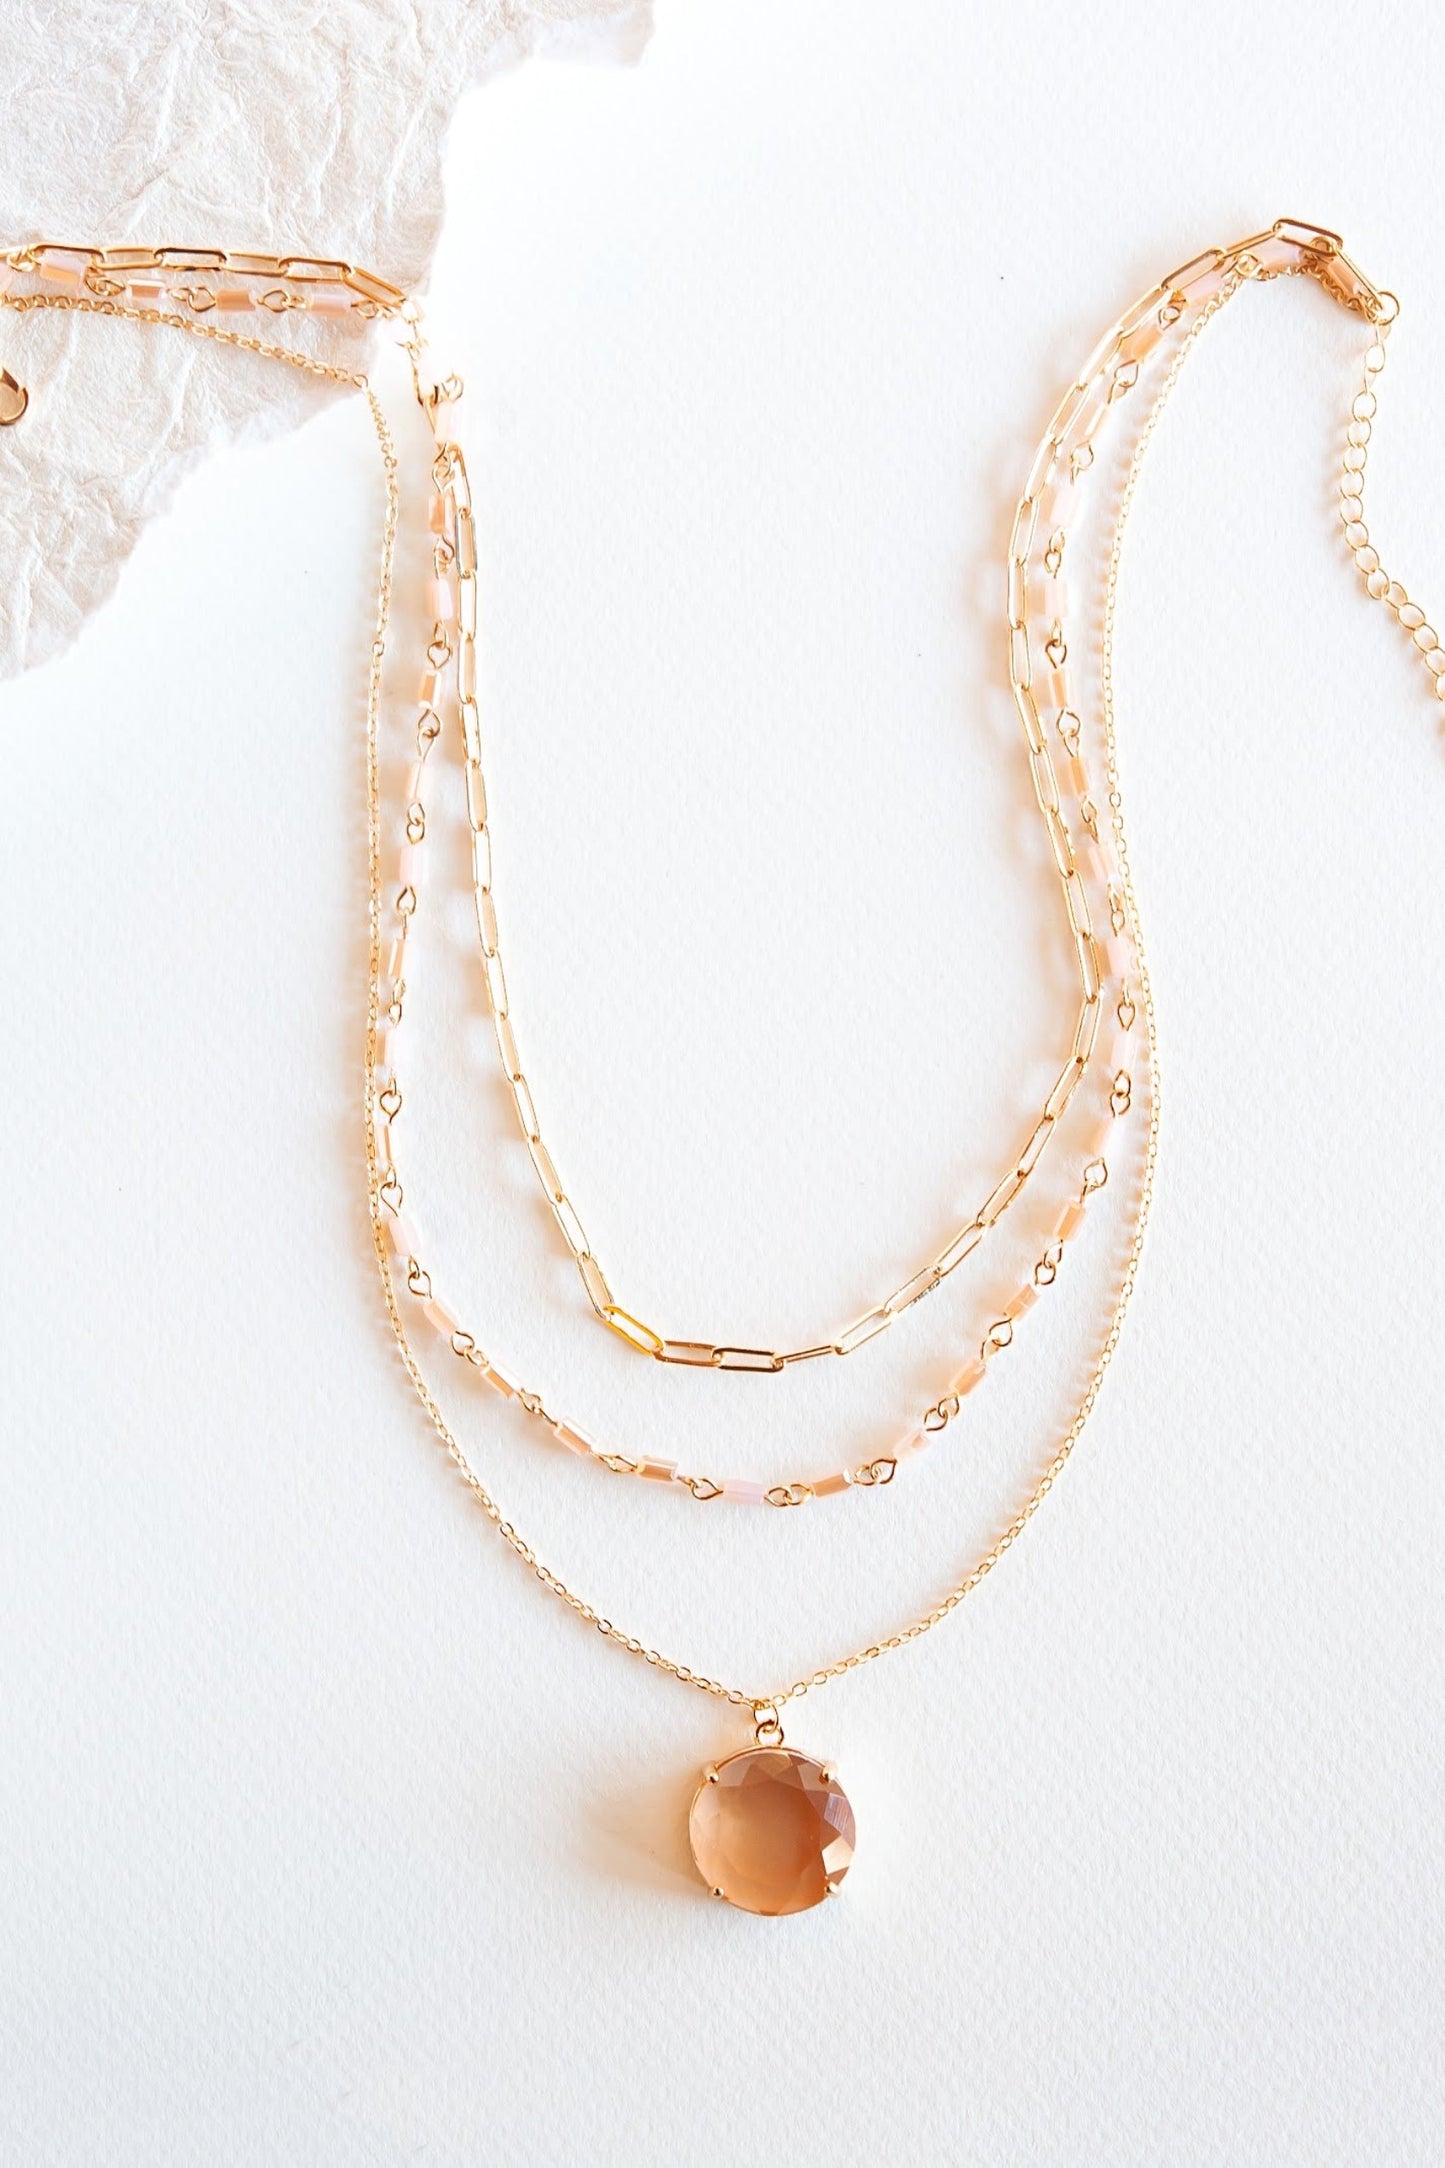 Mary Layering Necklace | Gold Chain and Round Crystal Accent Stone | Elegant Crystal Pendant and Gold Chain Necklace